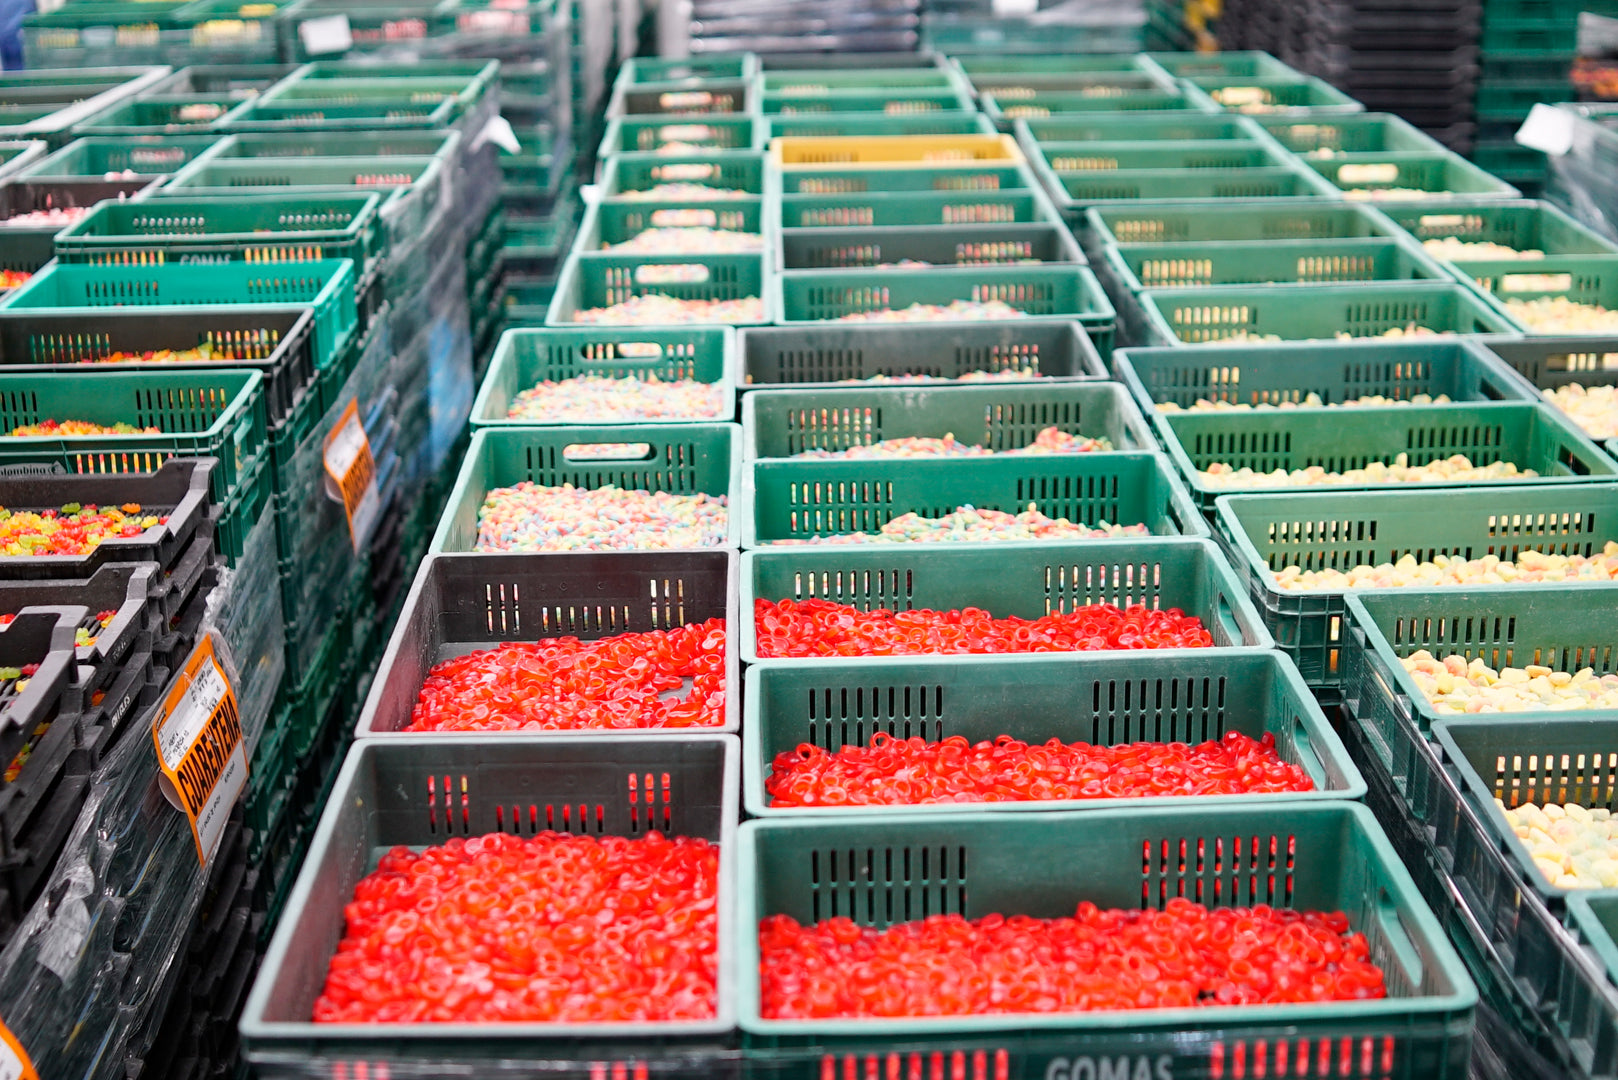 Assorted sugar confectionery products displayed in open green candy boxes in a production setting.